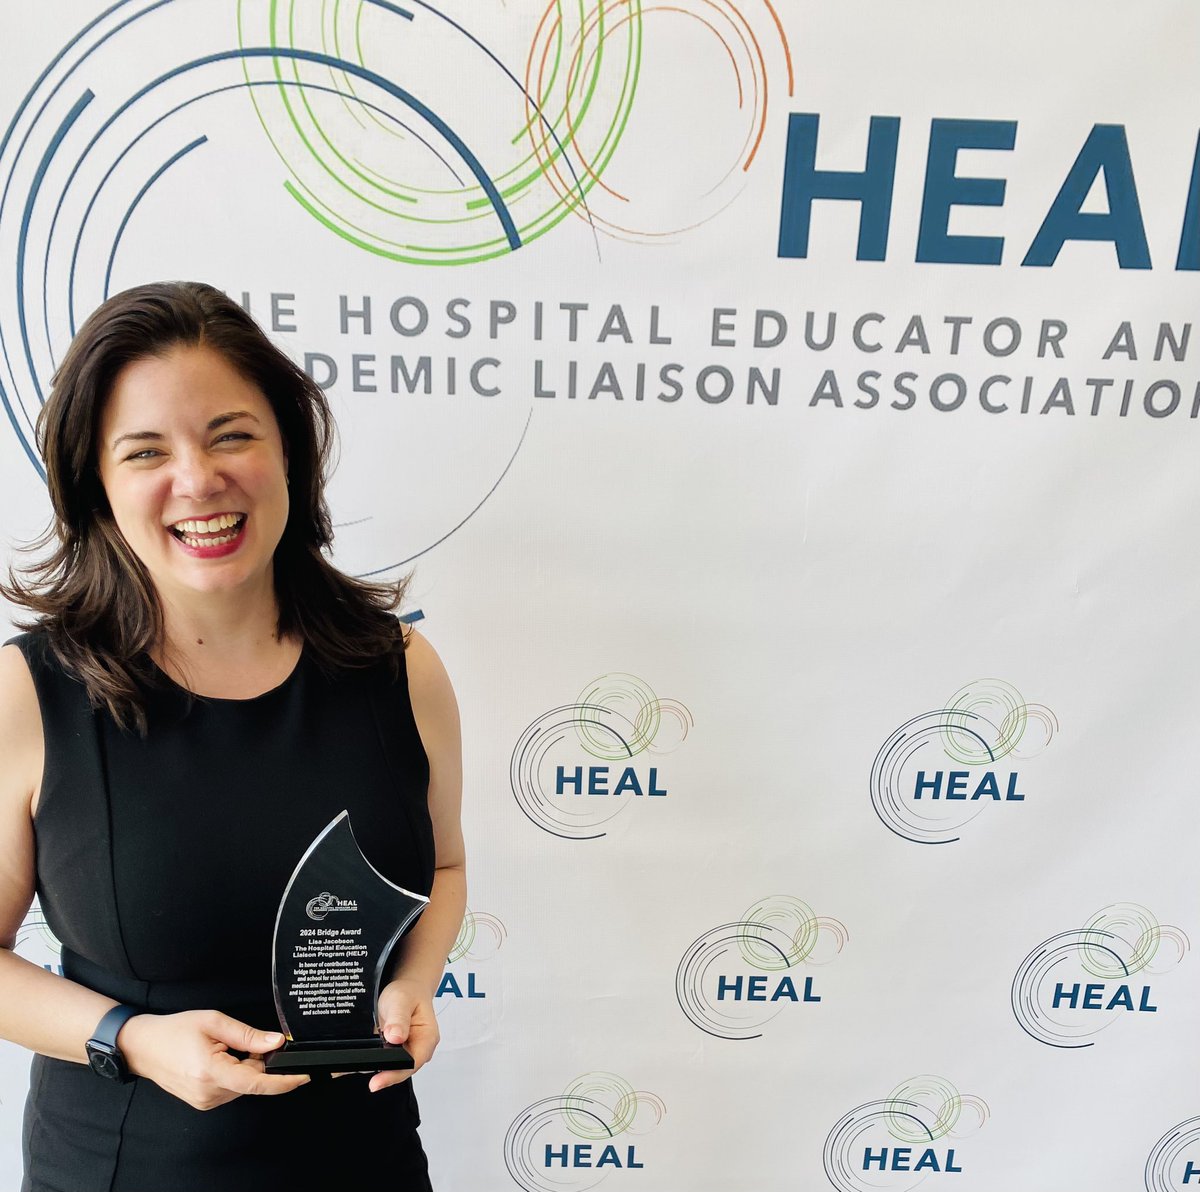 So proud to receive the HEAL Assoc Bridge Award for the Hospital Education Liaison Program (HELP) @KennedyKrieger I get to work with amazing clinicians, families, & schools to bridge pediatric medicine & k12 schooling. #DreamJob Thank you to @CCFtoday for your support!